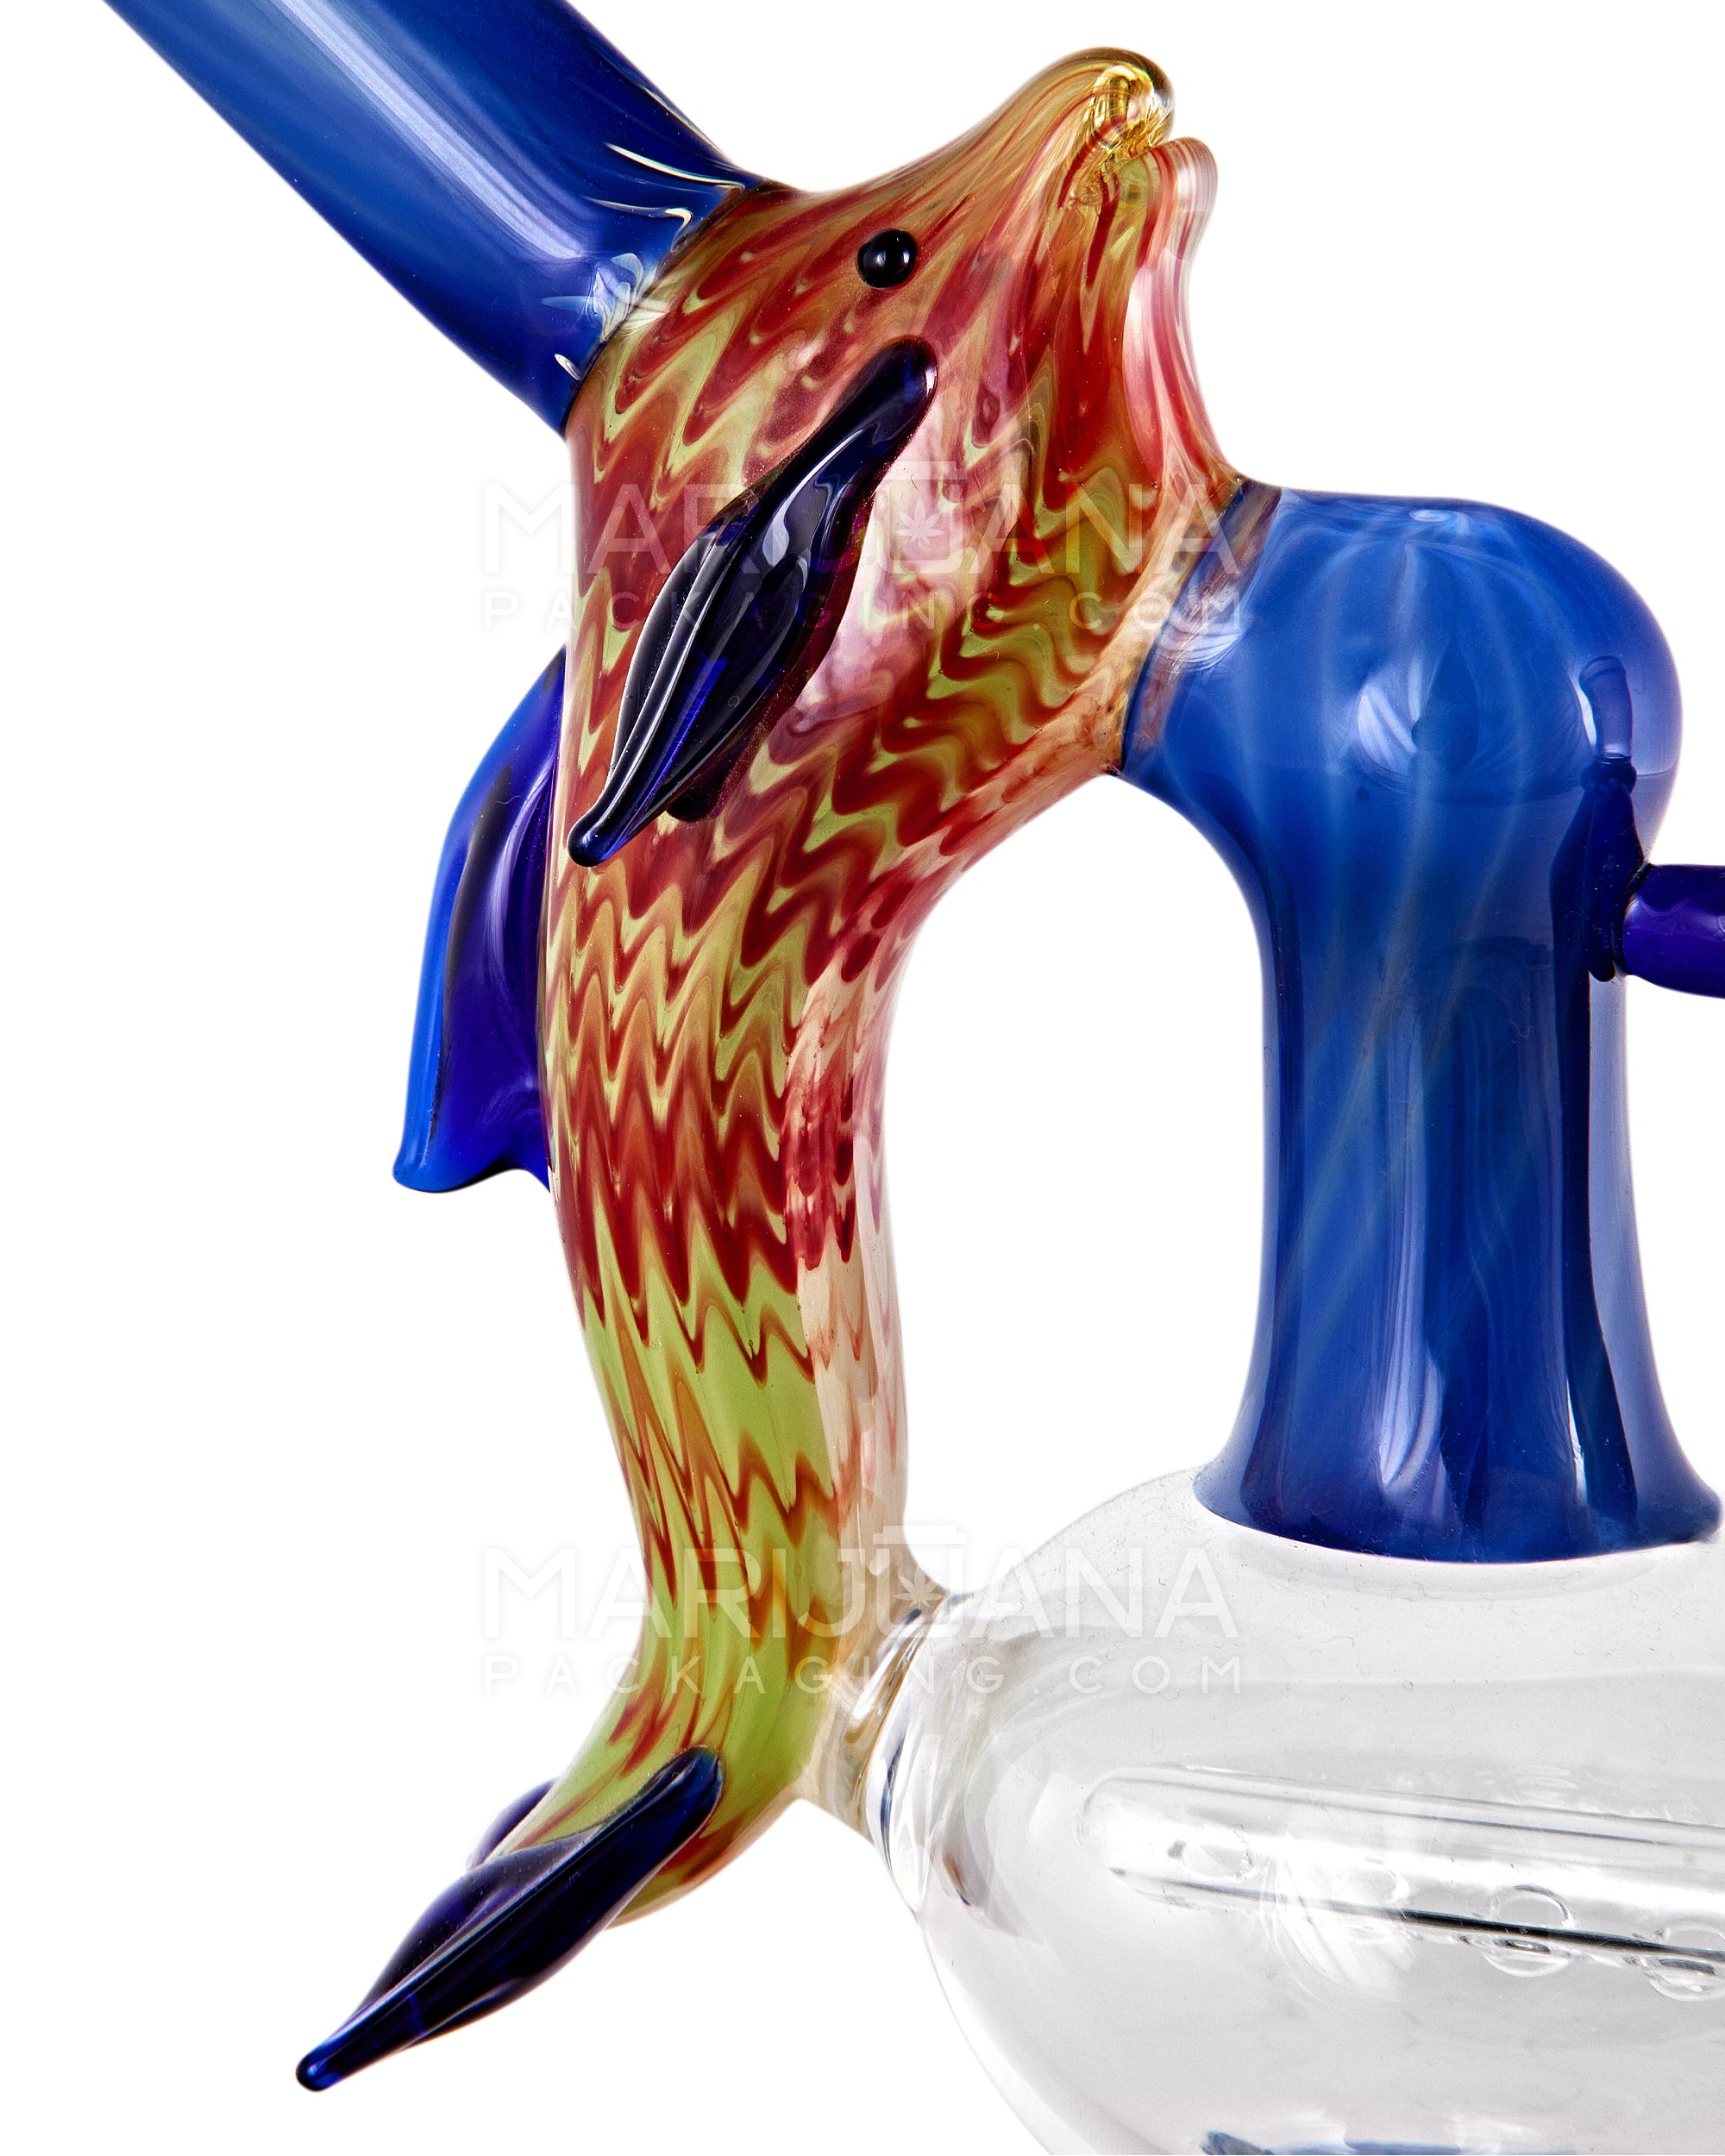 Heady | Angled Neck Inline Perc Raked & Color Pull Glass Dolphin Water Pipe | 7.5in Tall - 14mm Bowl - Assorted - 4